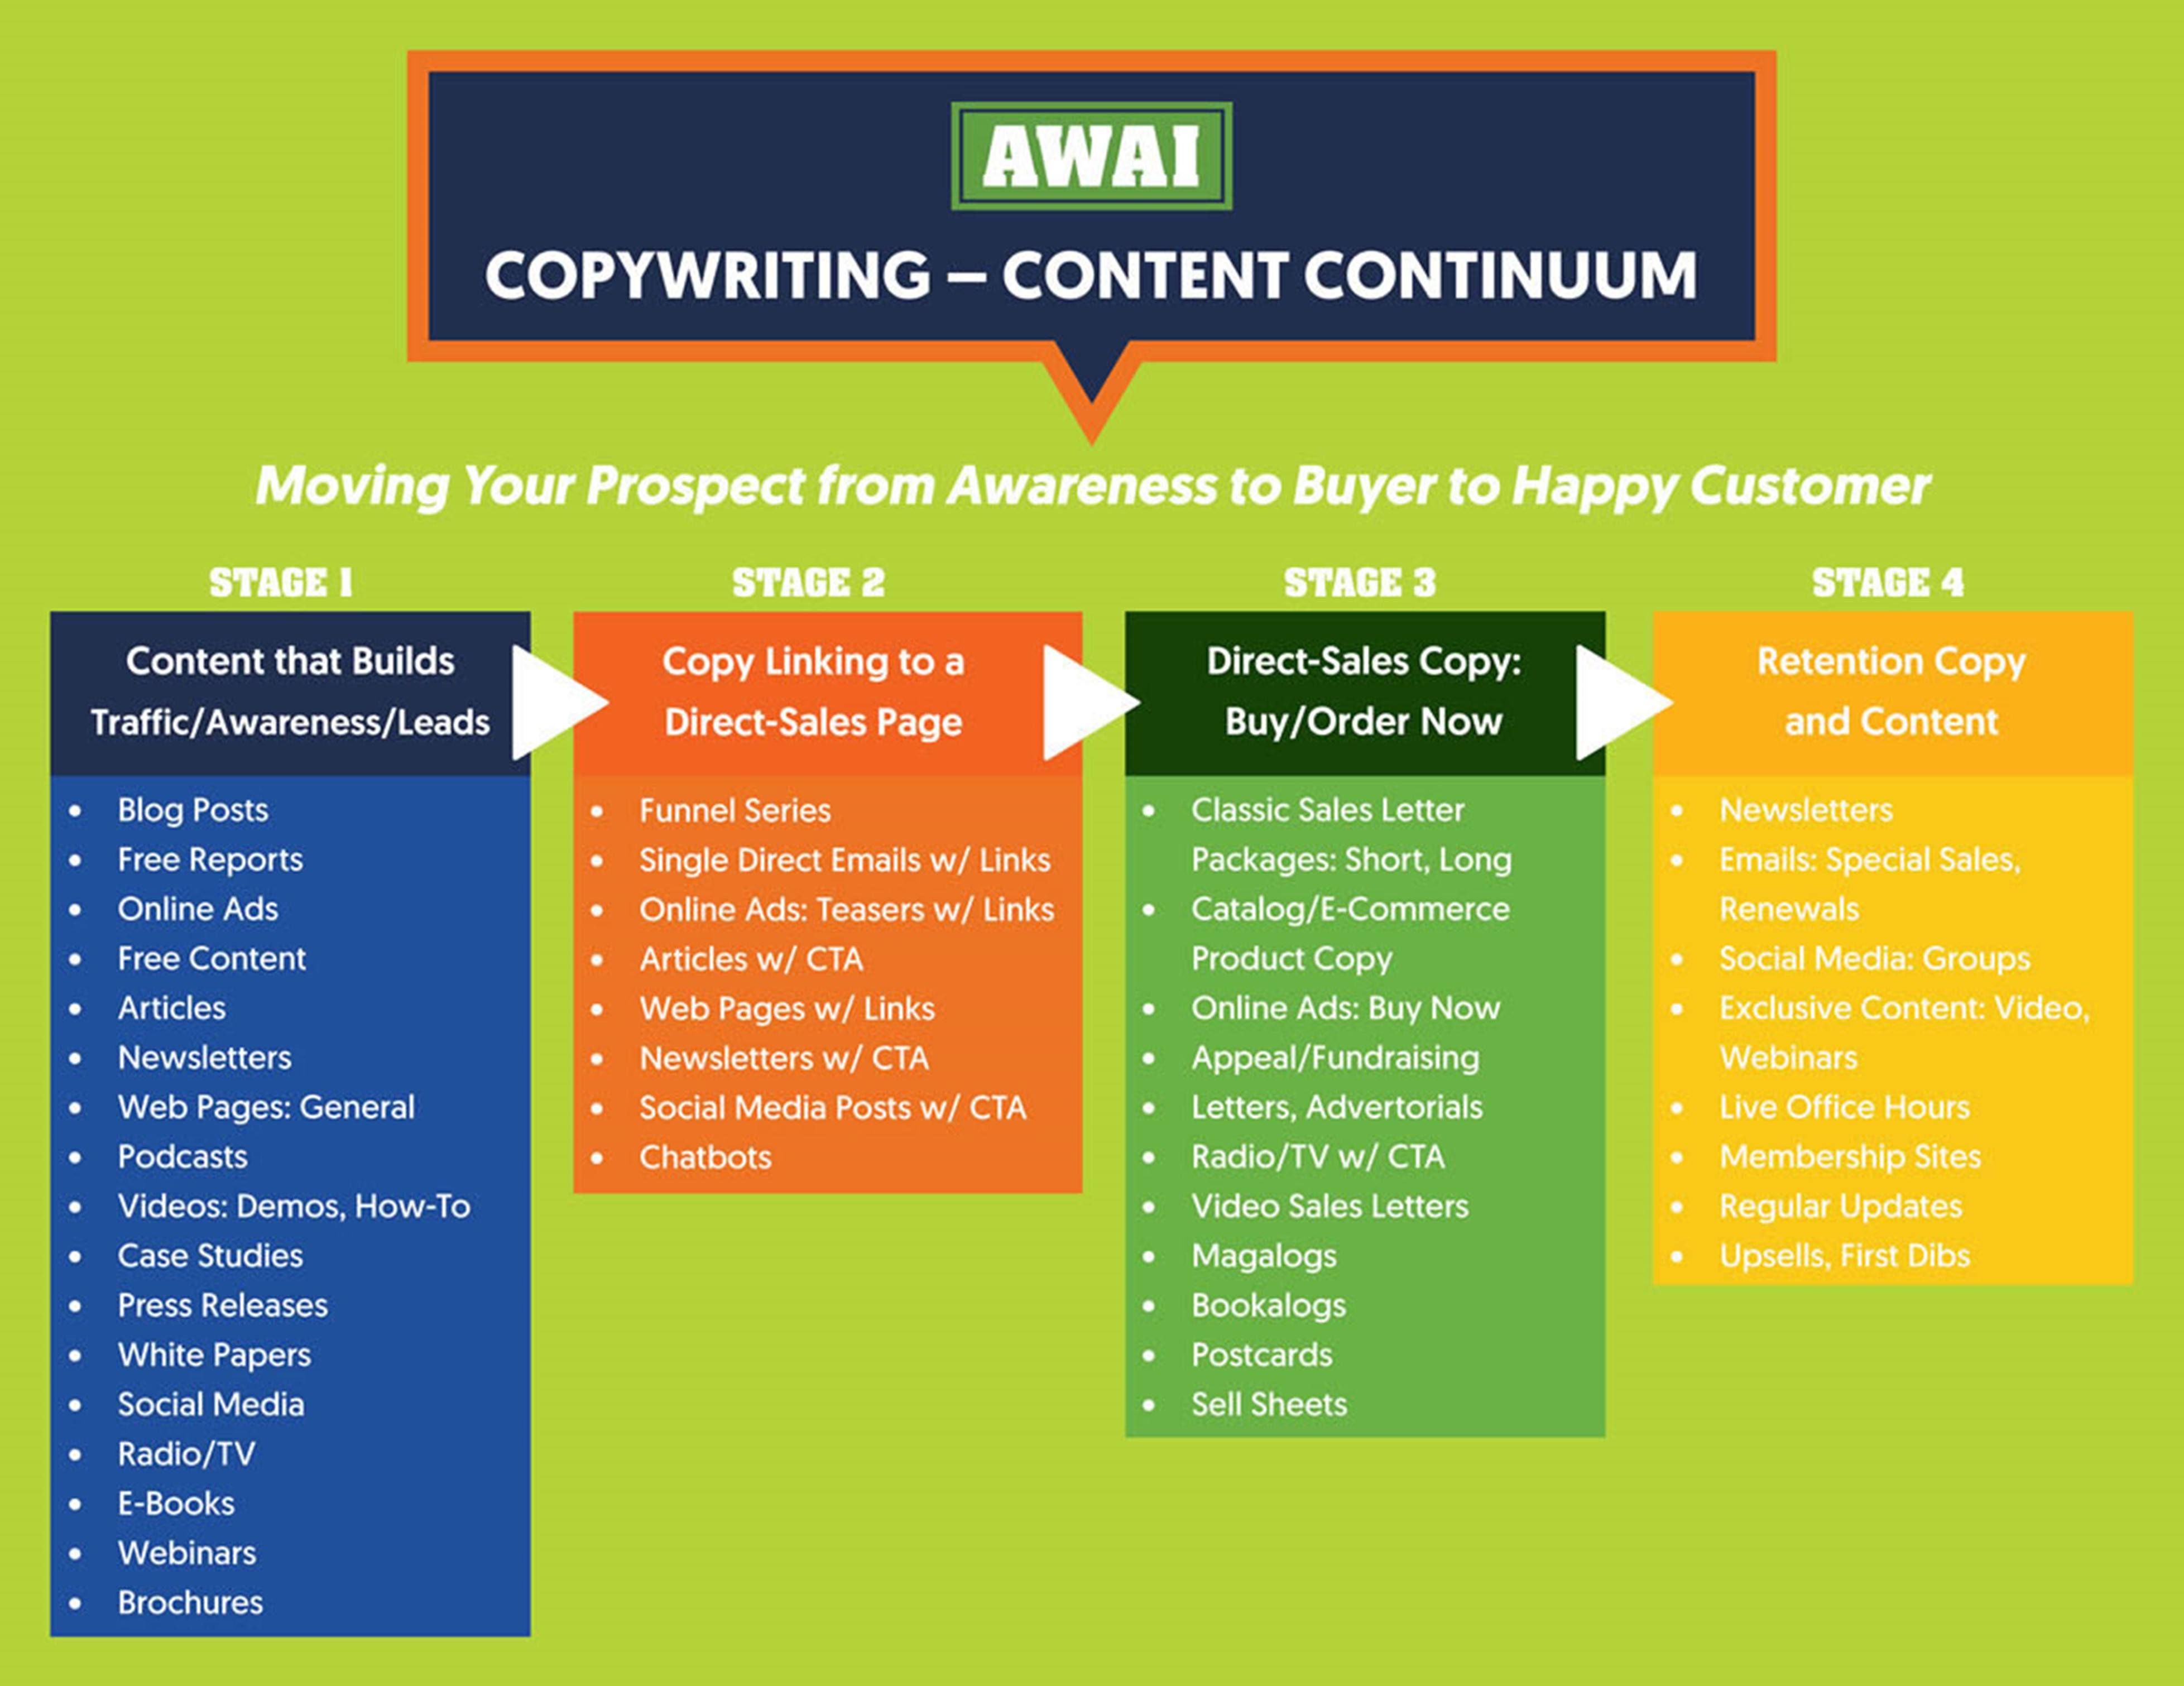 Graphic of the AWAI copywriting content continuum.  Moving your prospect from awareness to buyer to happy customer.  Stage 1:Content that builds traffic/awareness/leads.  Stage 2:Copy linking to a direct sales page. Stage 3:Direct sales copy, buy/order now. Stage 4:Retention copy and content.